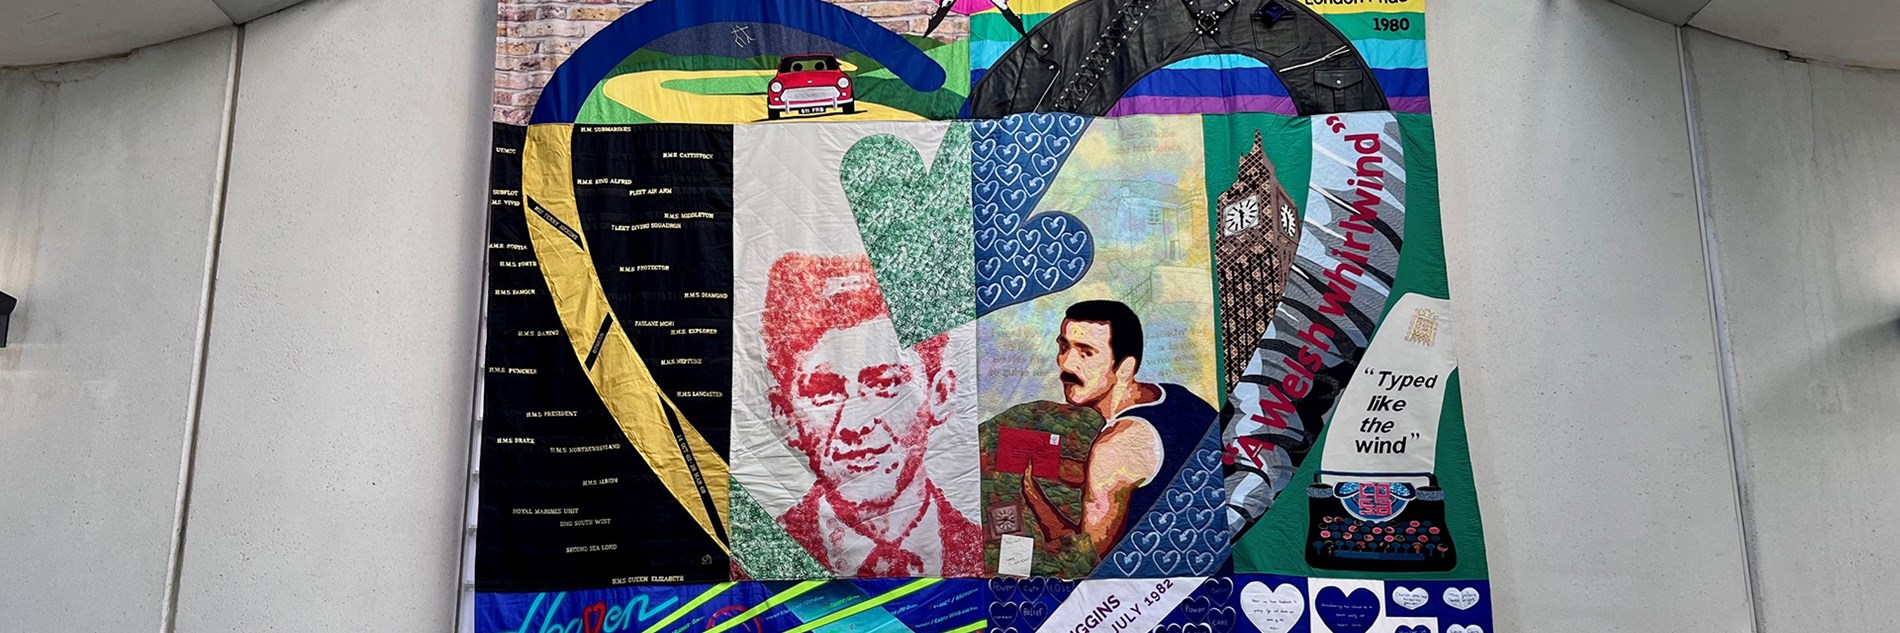 A colourful embroidered quilt featuring text and images. At the centre are two portraits of Terry Higgins which are framed by a heart motif. The quilt is hung on a concrete and glass wall in a contemporary building.